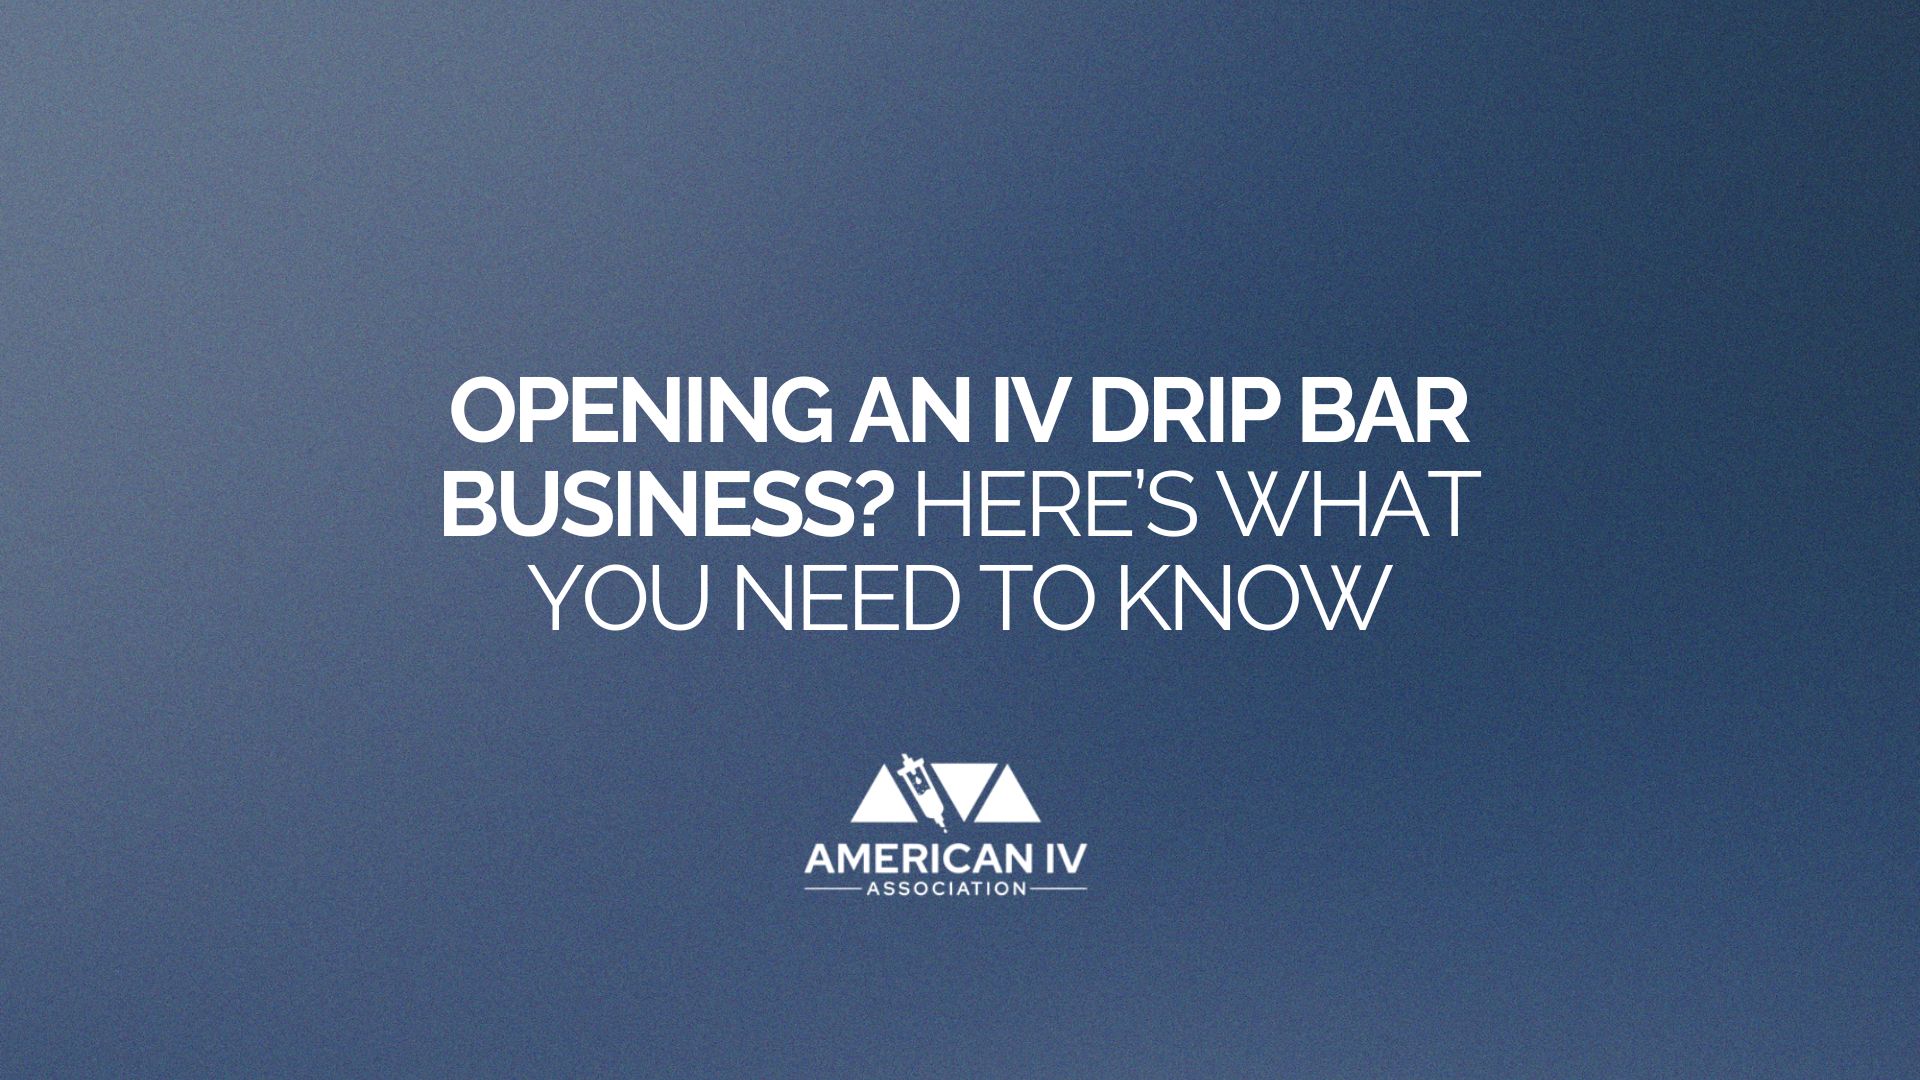 Opening an IV drip business? Here’s what you need to know